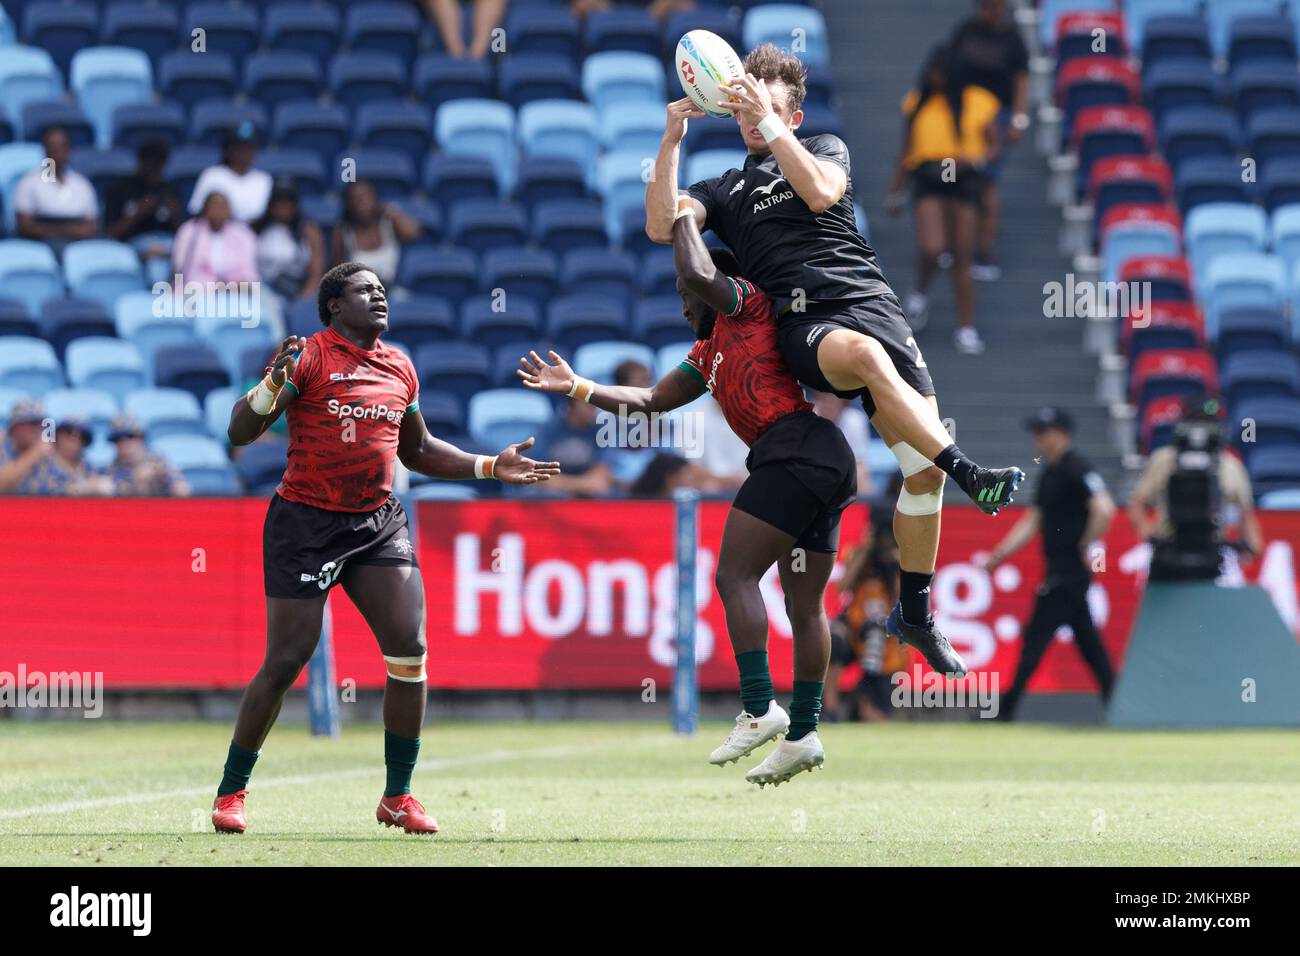 Sydney, Australia. 28th Jan, 2023. Lewis Ormond of New Zealand grabs the ball during the 2023 Sydney Sevens match between New Zealand and Kenya at Allianz Stadium on January 28, 2023 in Sydney, Australia Credit: IOIO IMAGES/Alamy Live News Stock Photo